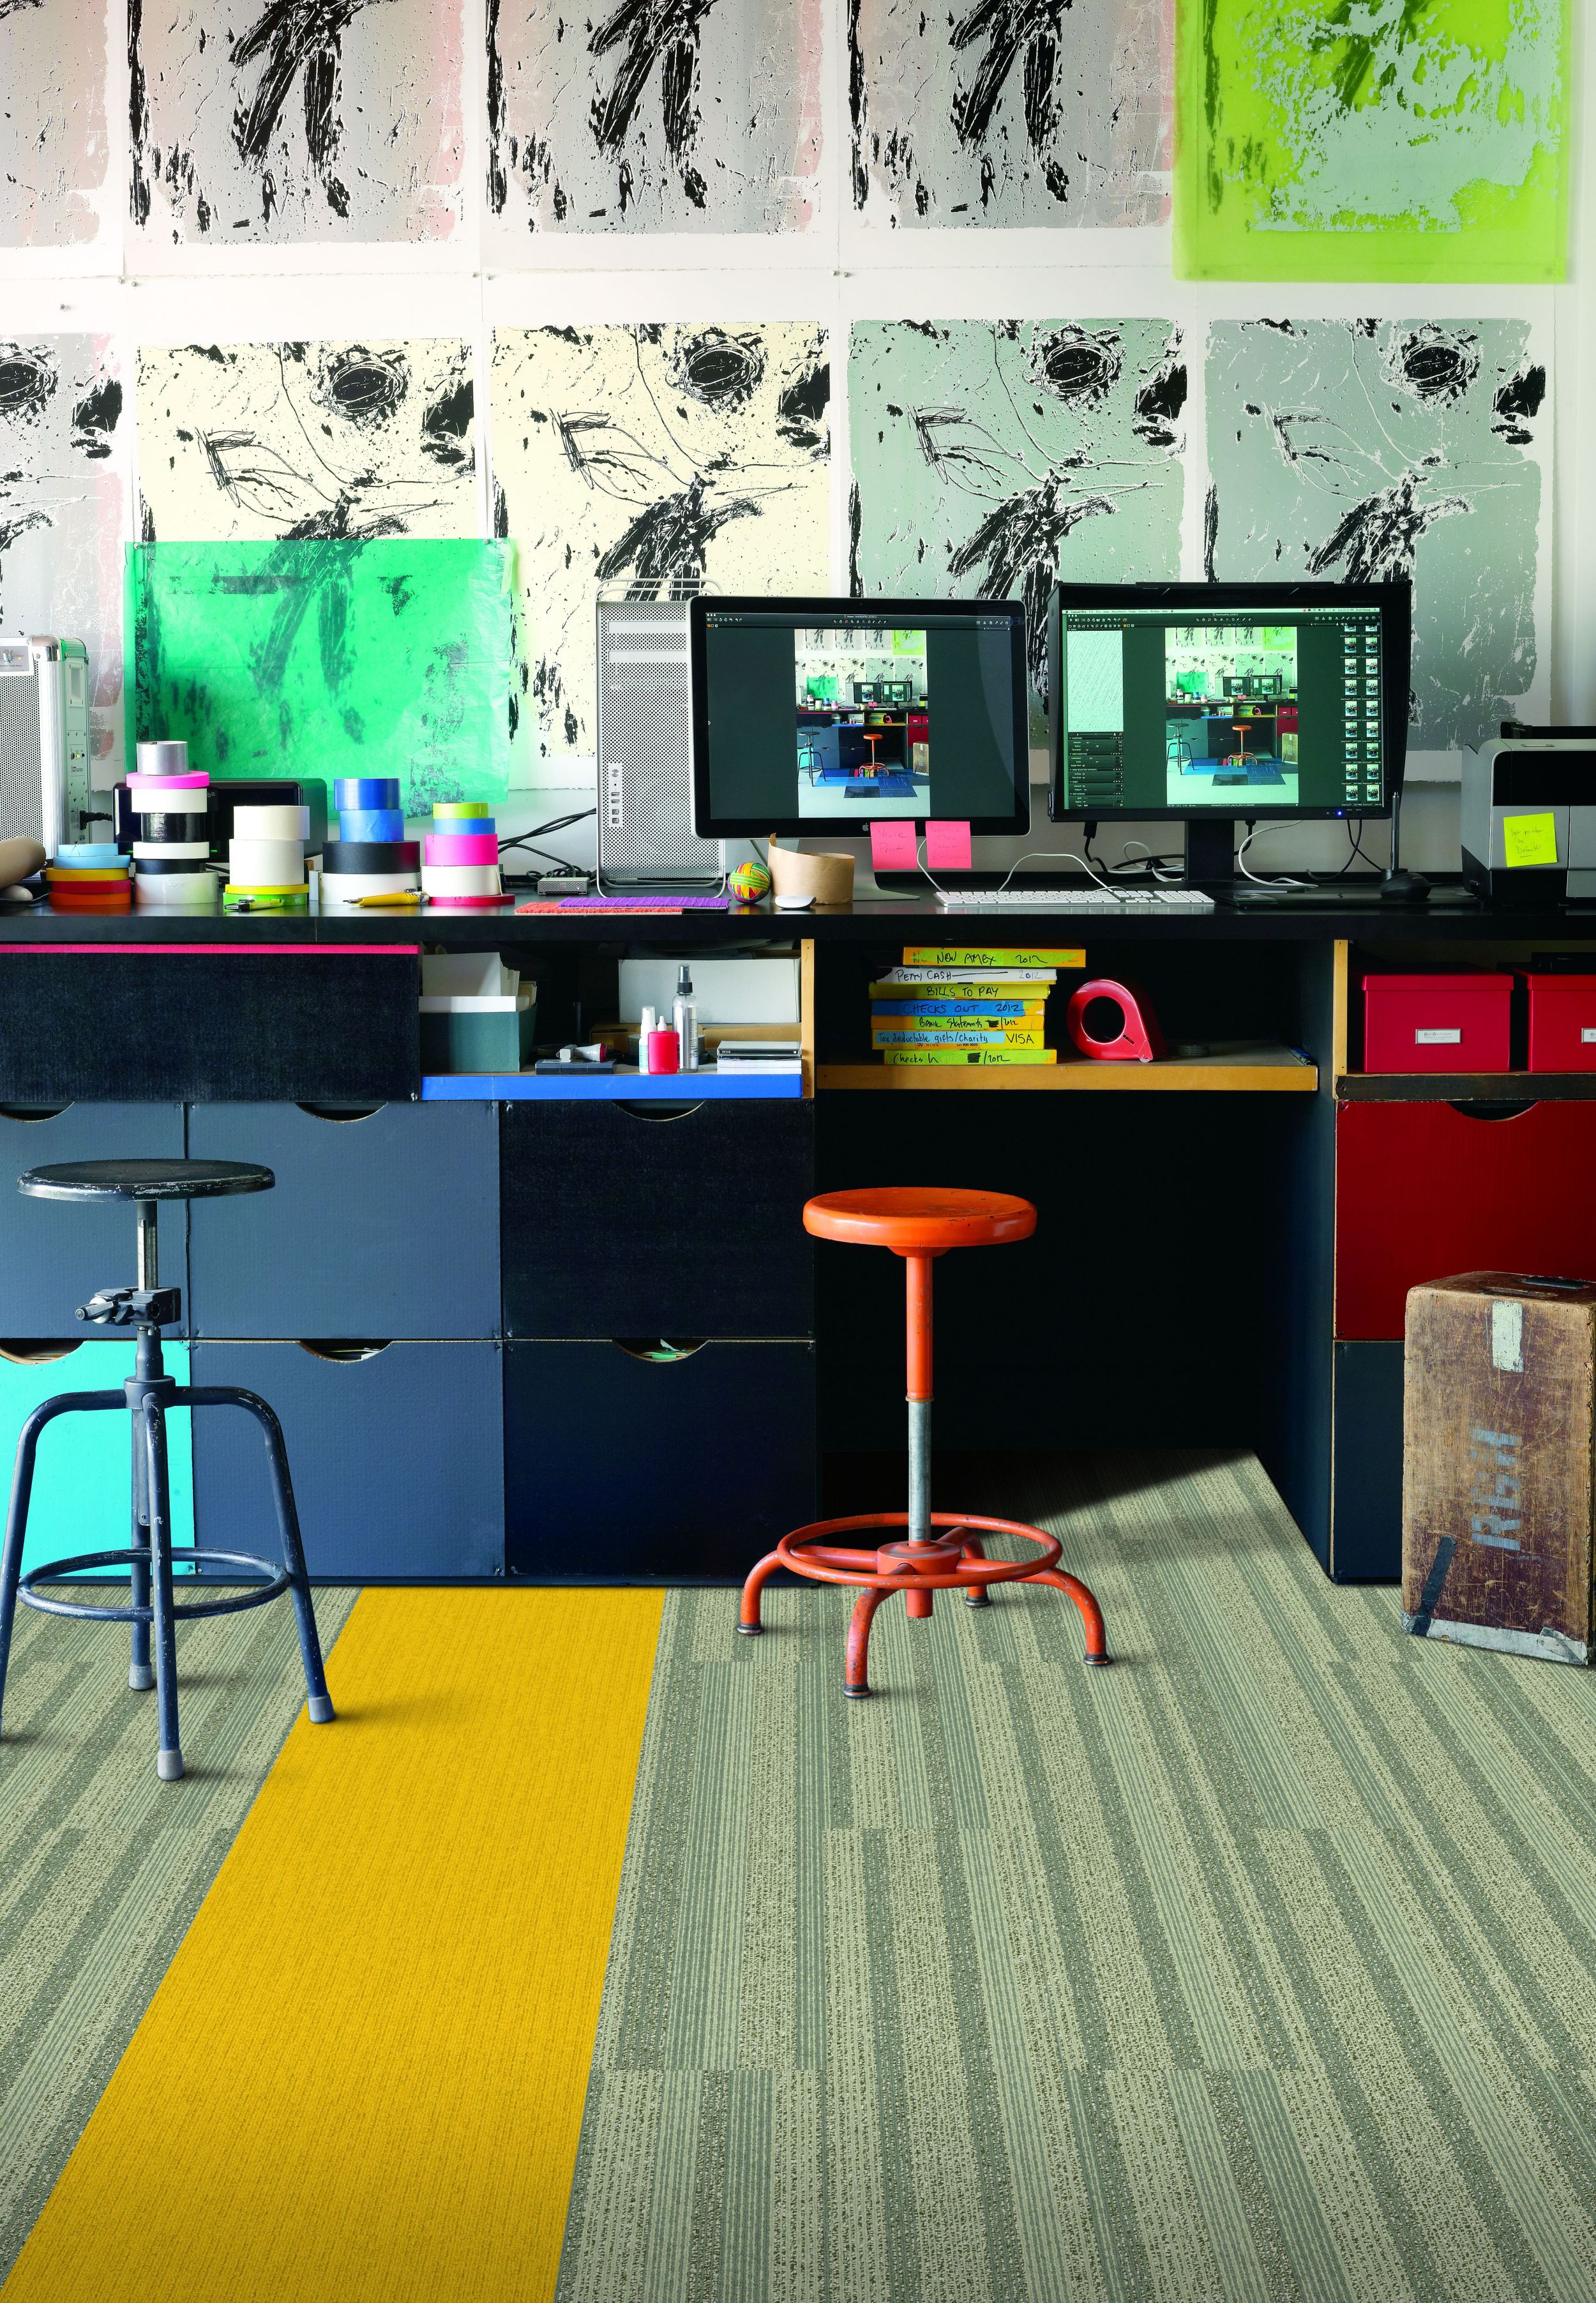 Interface SS217 and Viva Colores carpet tile in a colorful workspace imagen número 2